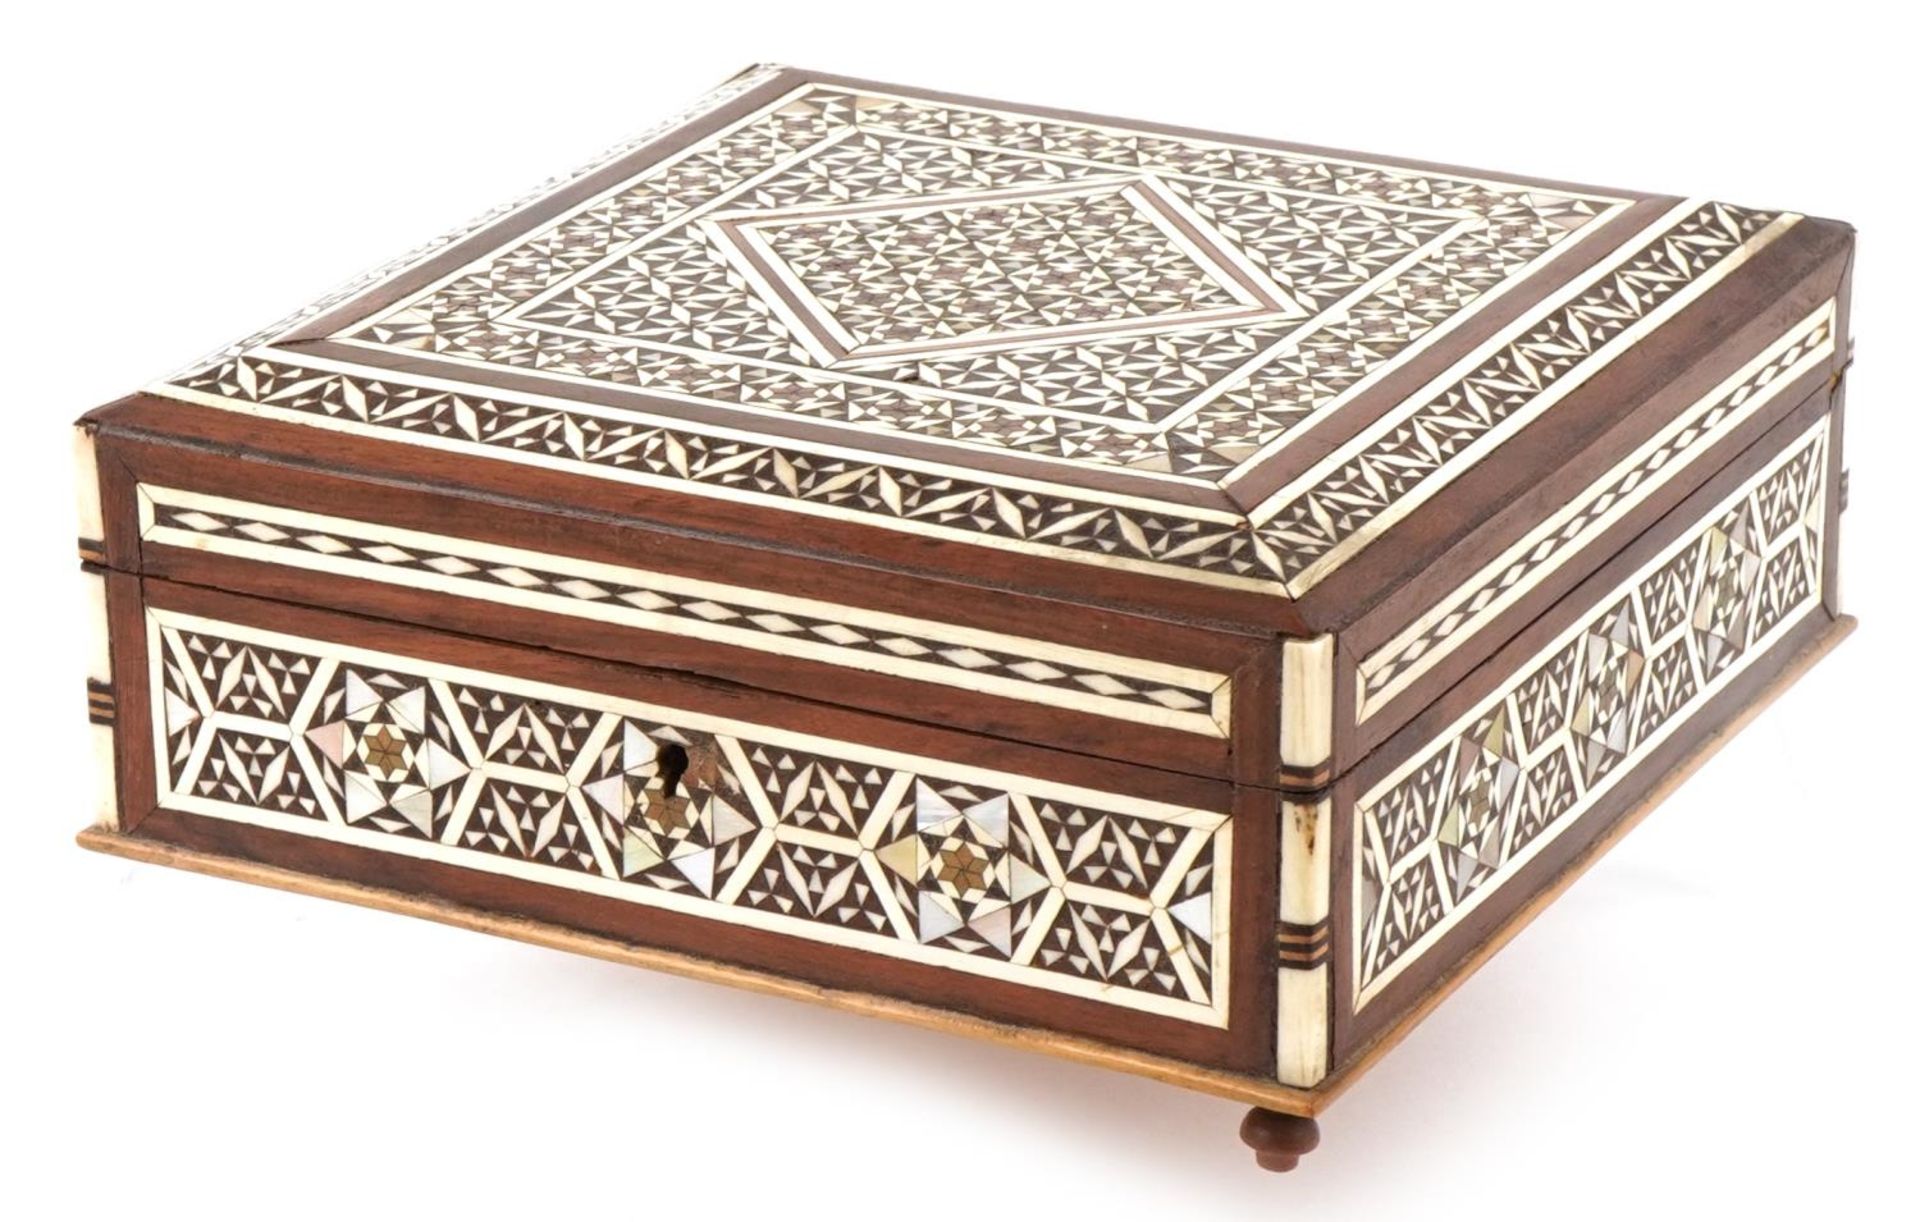 Moorish style Vizagapatam design musical jewellery box with bone and mother of pearl inlay, 8.5cm